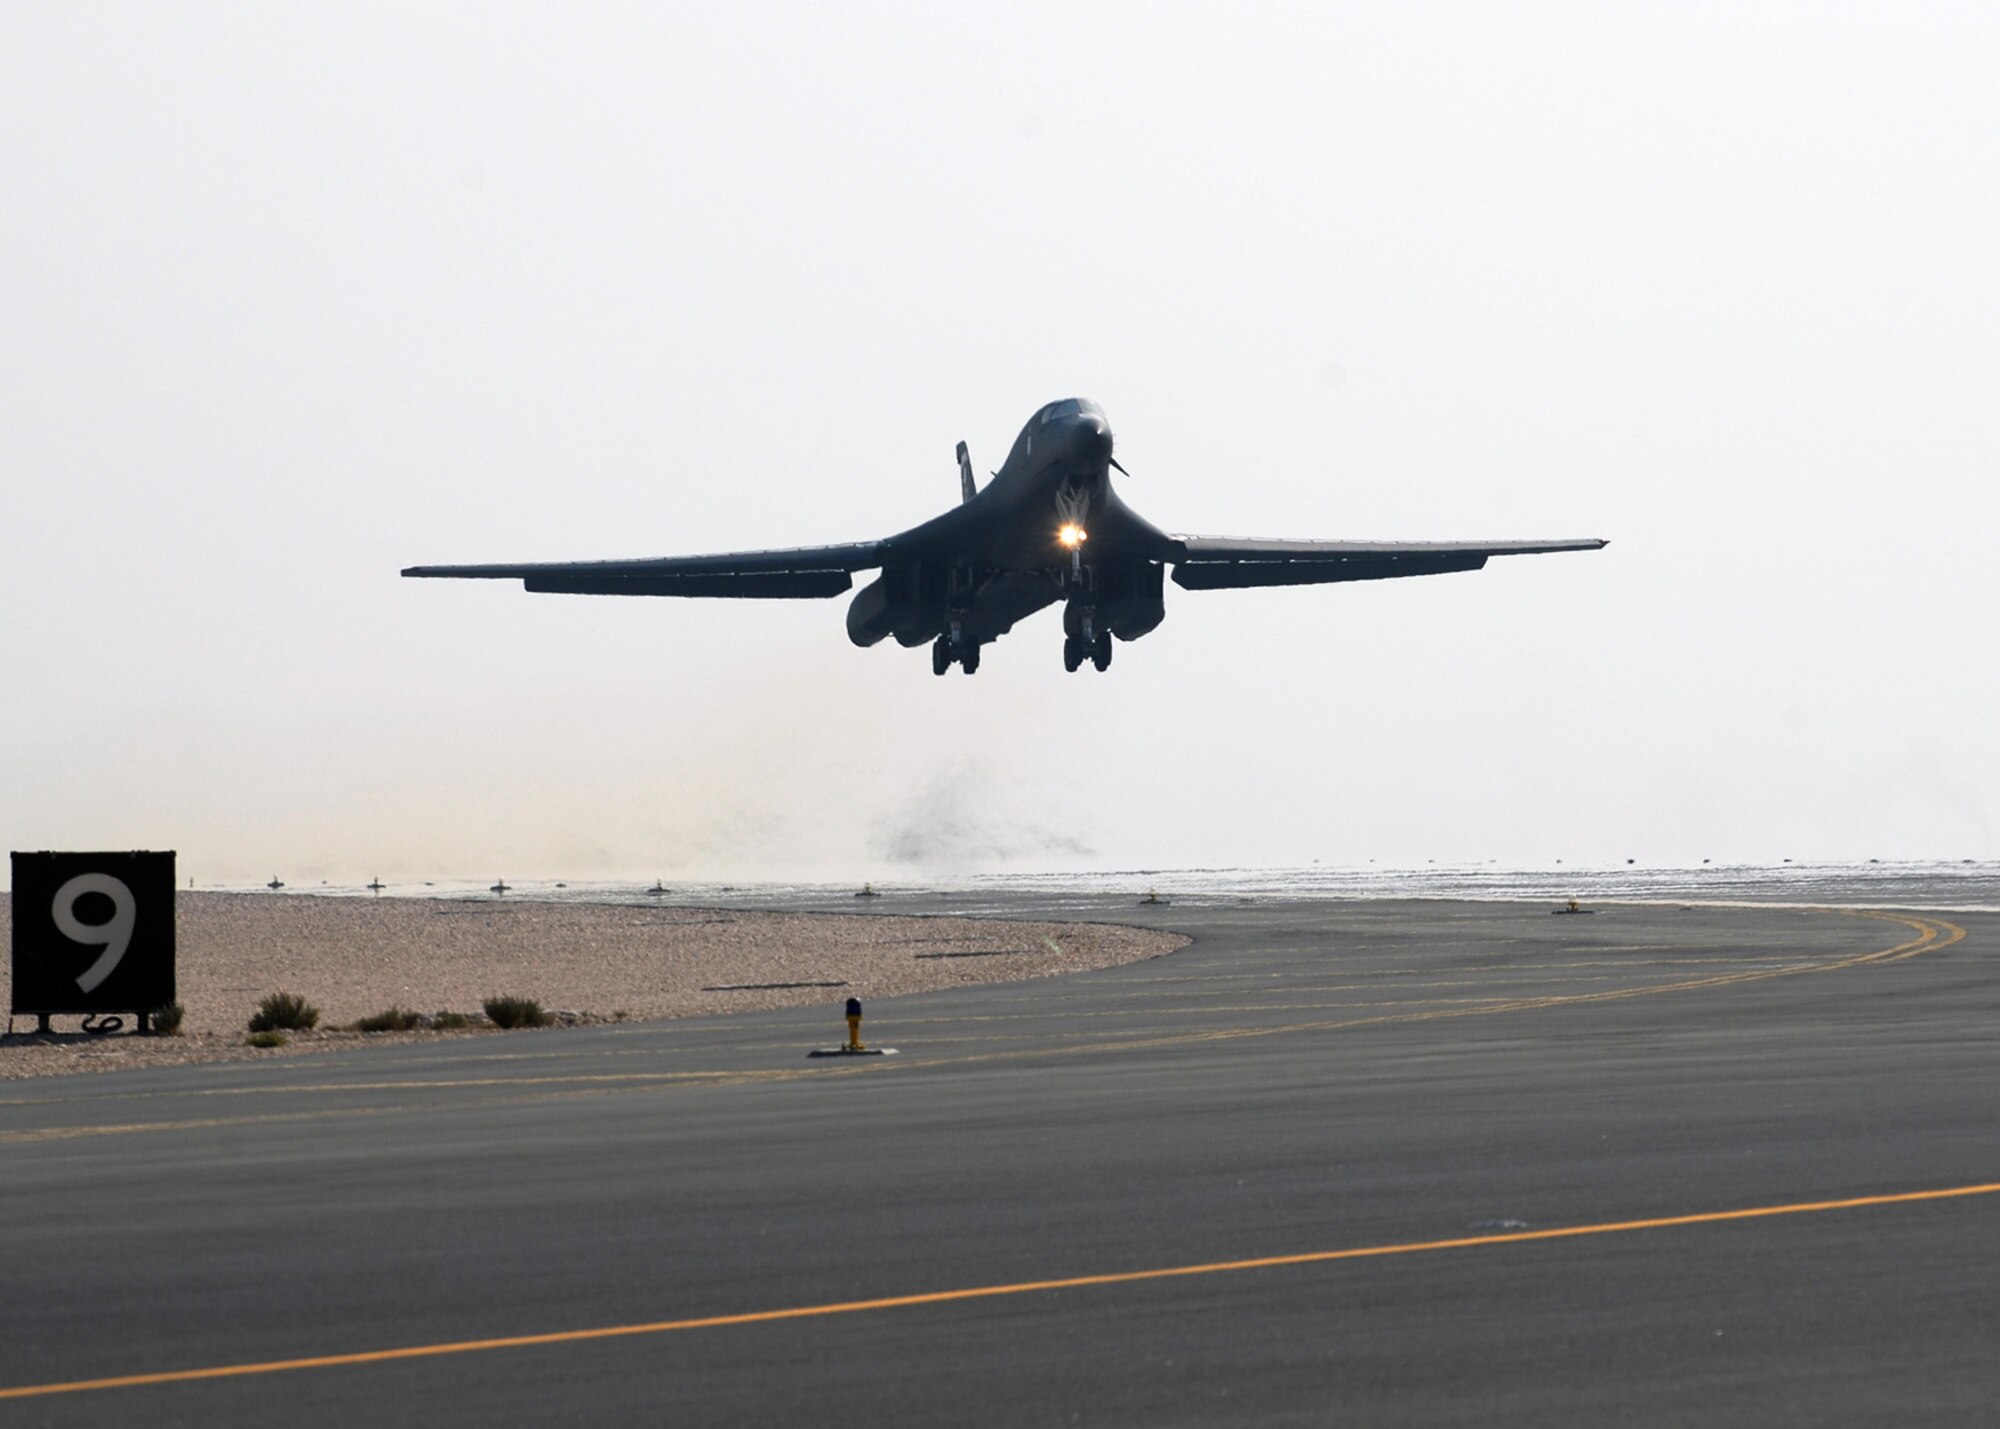 SOUTHWEST ASIA - A mission-bound B-1B Lancer lifts off from the runway of a Southwest Asia air base  Dec.29. The B-1B is a multi-role, long-range bomber, capable of flying intercontinental missions without refueling. It is capable of performing a variety of missions, including that of carrying conventional weapons for theater operations. (U. S. Air Force photo/Staff Sgt. Douglas Olsen)